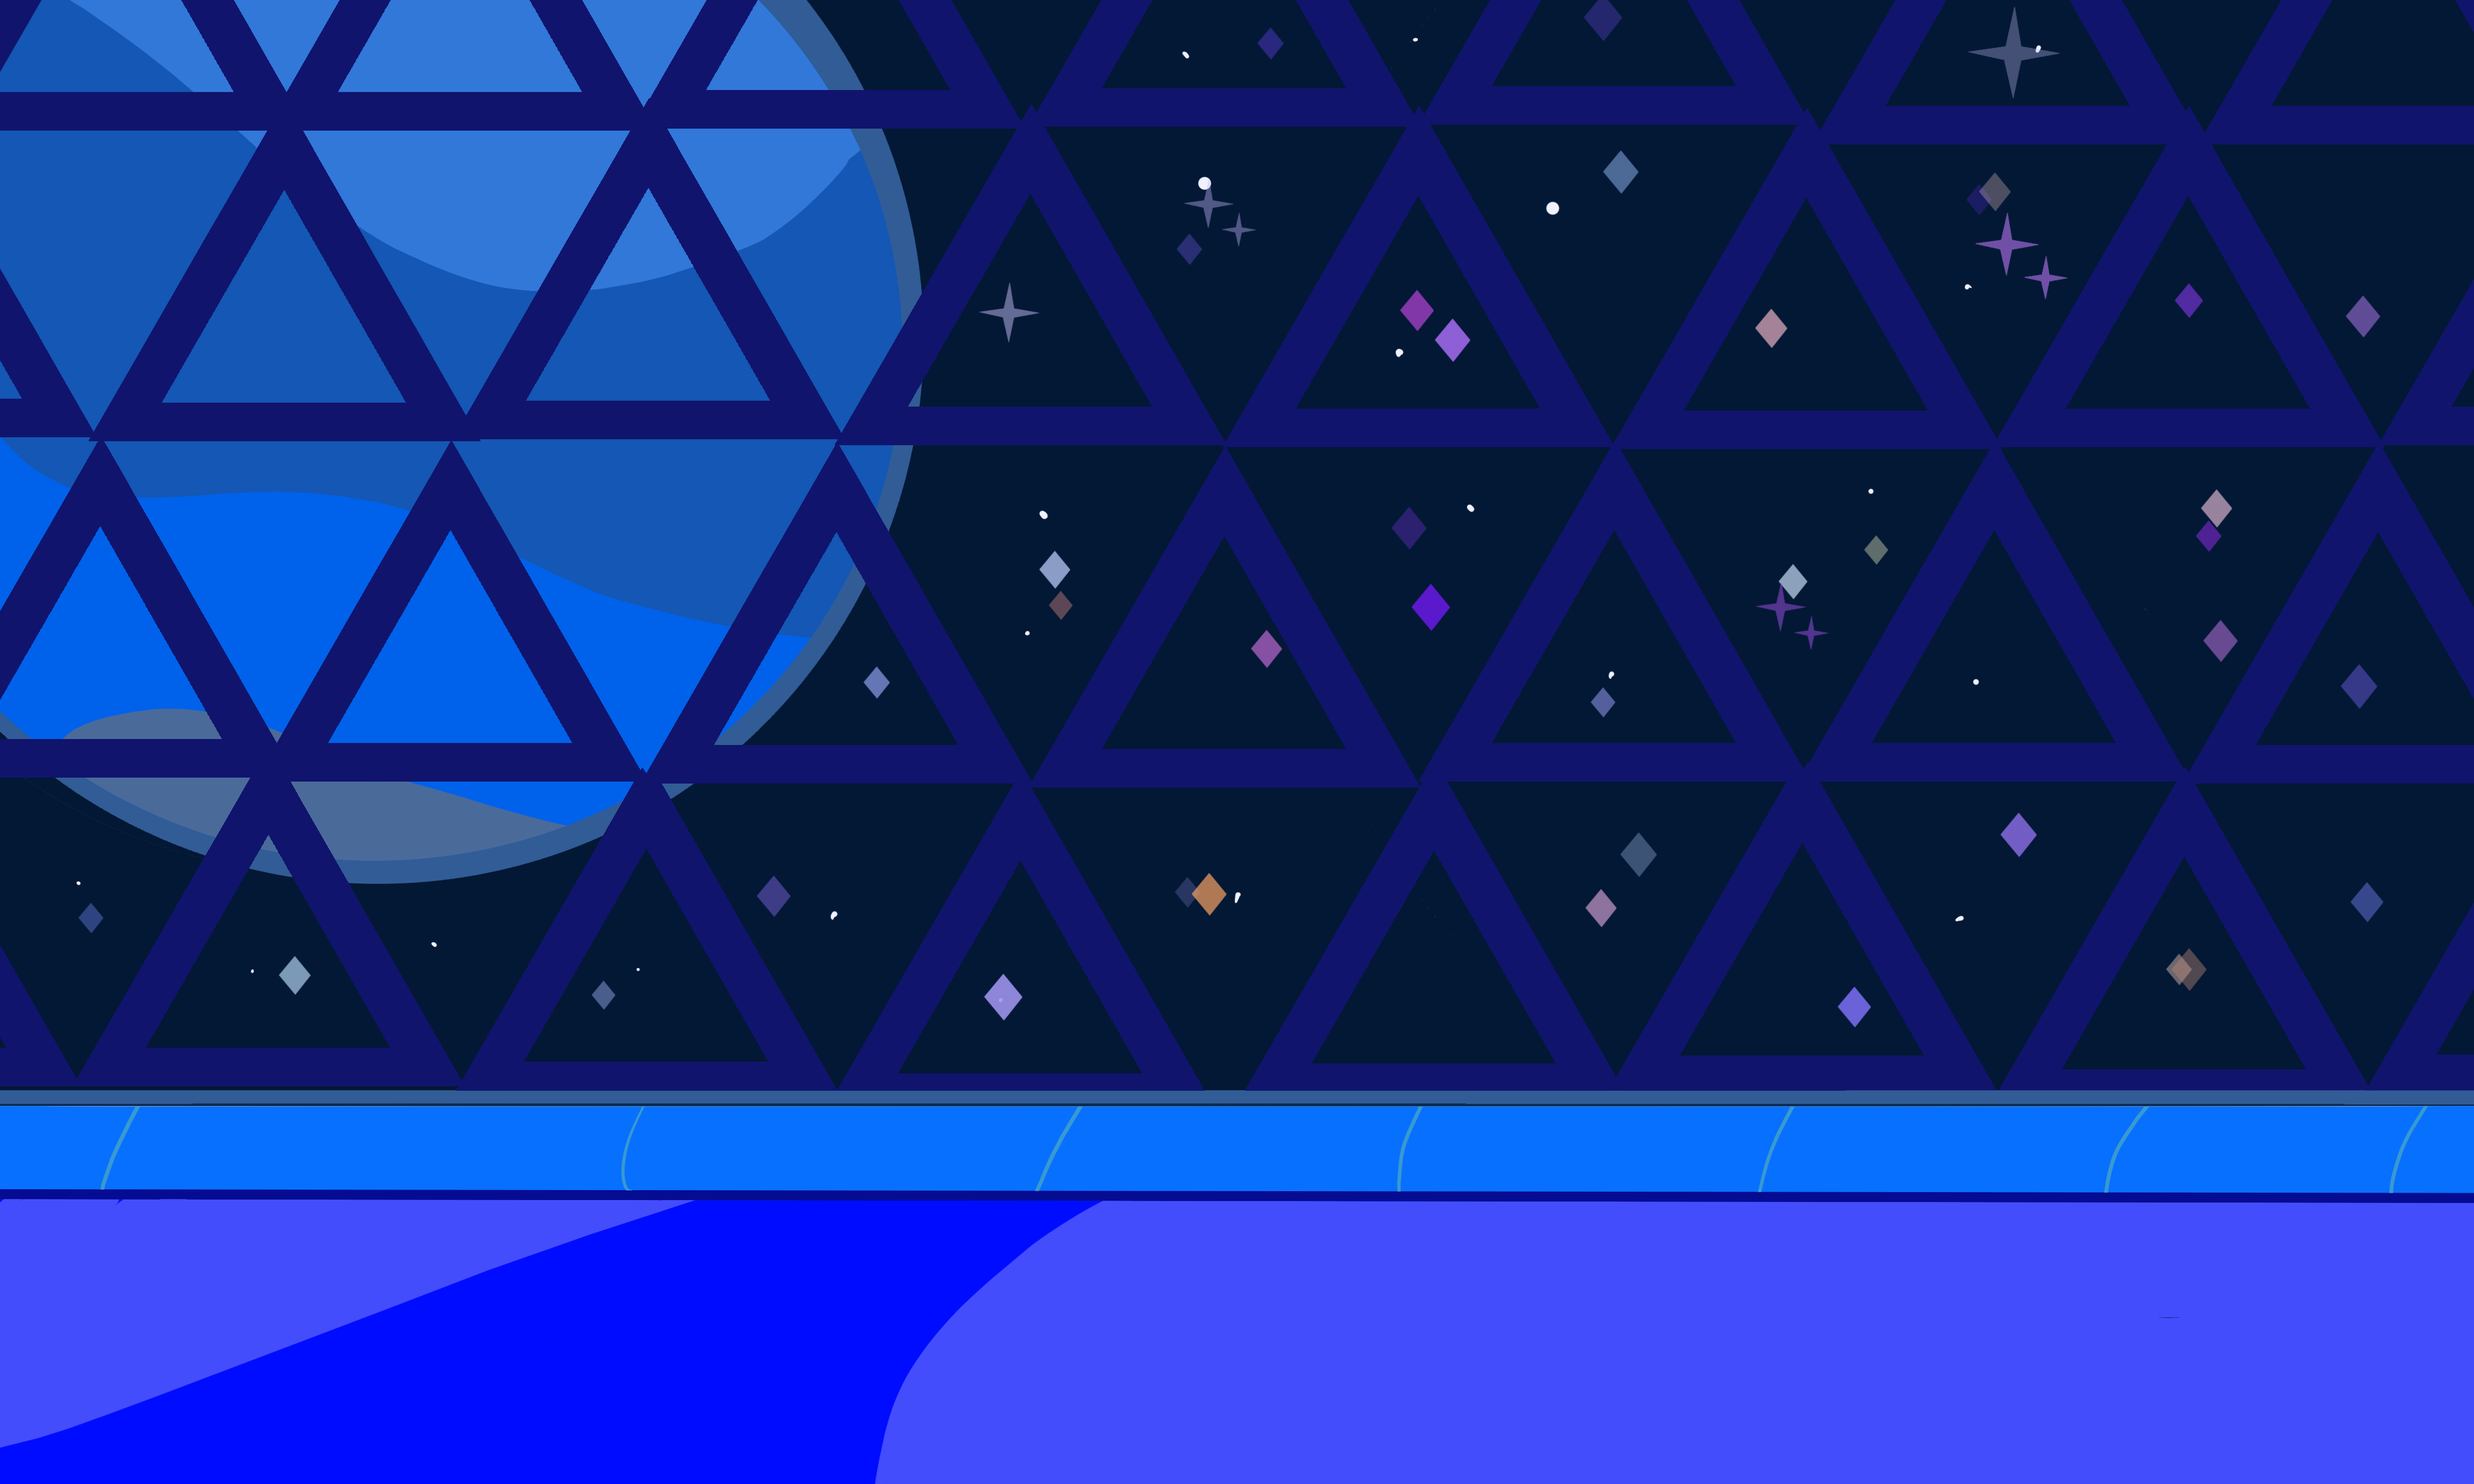 Tried Drawing A Su Background Thats Neptune In The